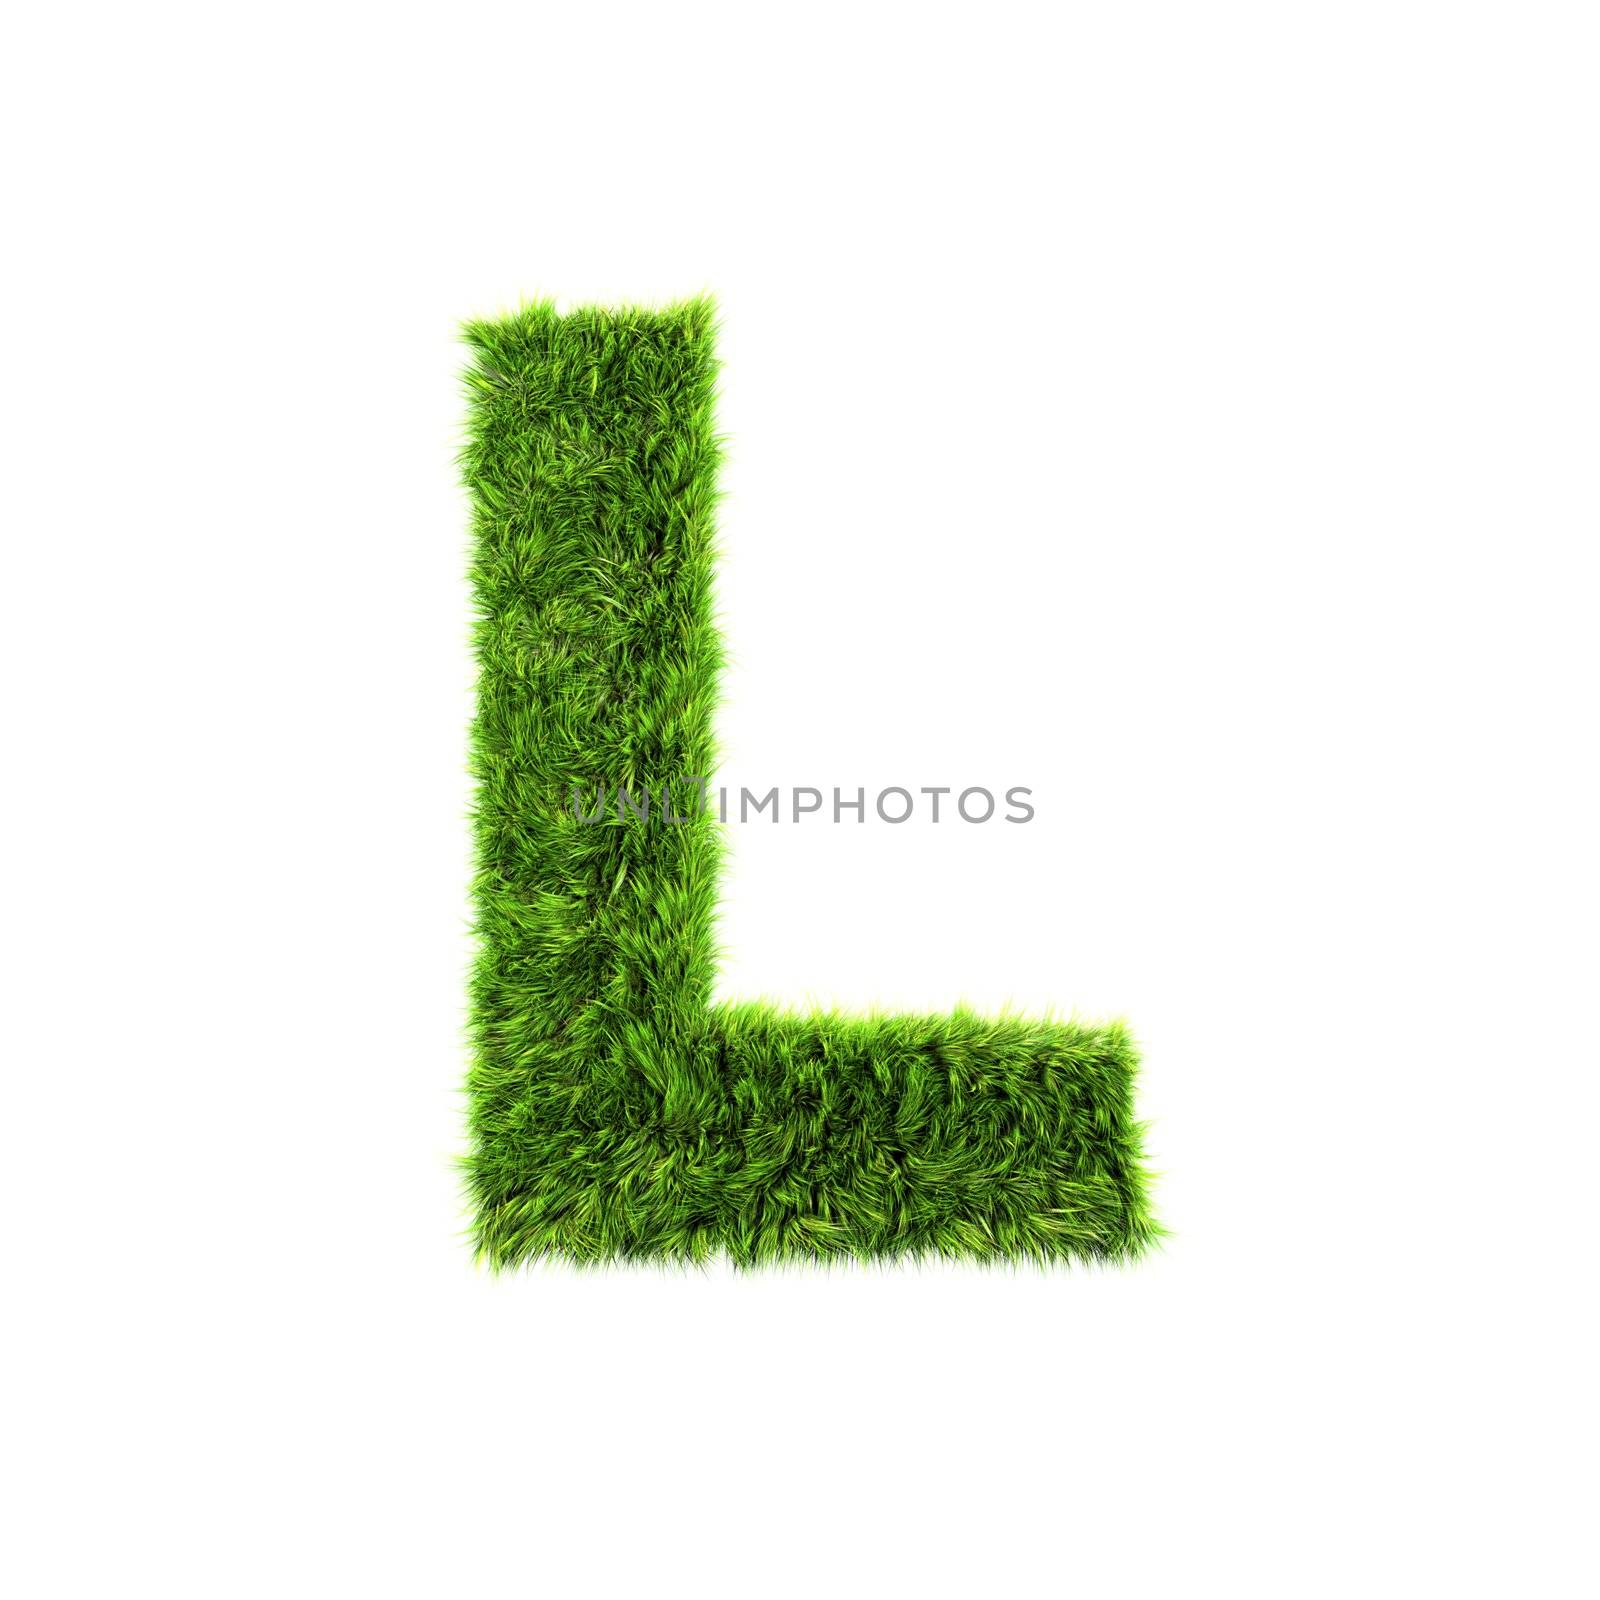 3d grass letter isolated on white background - L by chrisroll